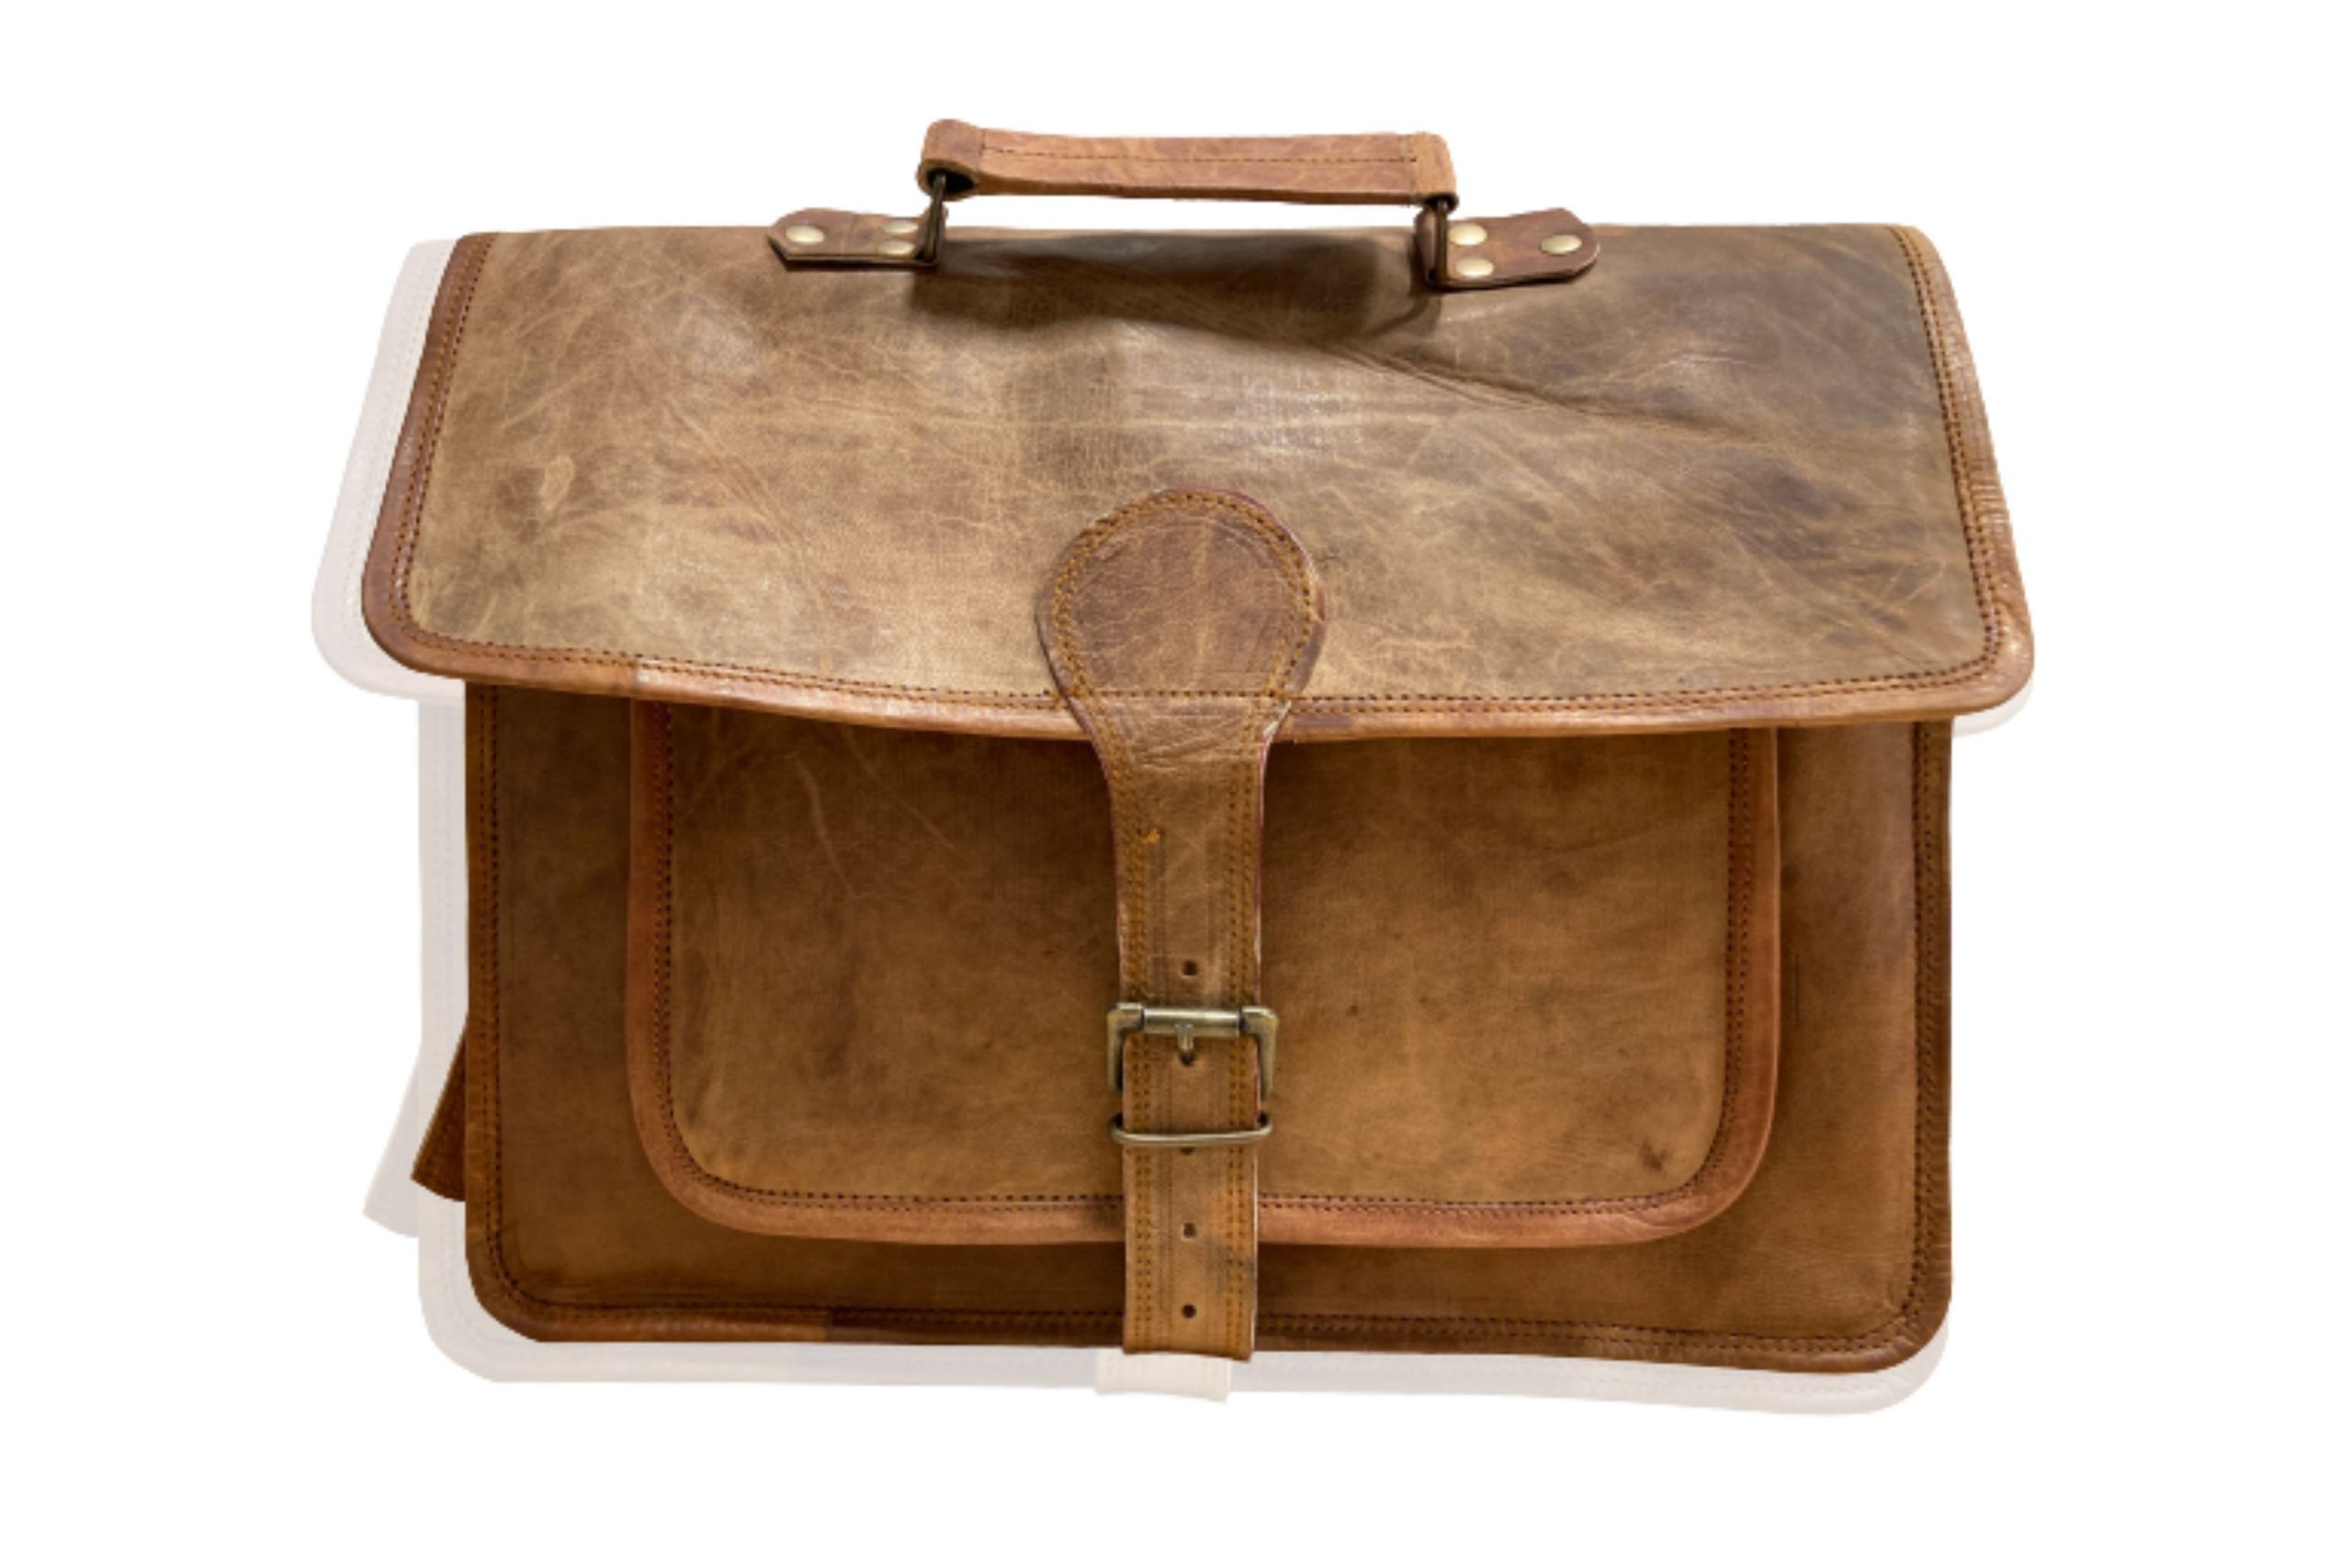 This satchel briefcase is made from vintage leather that is aged and has the desired effect of being “worn and used”. There are imperfections in the leather which add to the character of the bag, creating a vintage effect that will stay in fashion for years to come.
The main flap, secured by the front adjustable strap, opens on three main compartments.
The satchel also features various pockets, perfect to store all your essentials; the bag has a front pouch, two inner zipped pockets and two side pockets with an adjustable strap closure.
The bag has an adjustable and matching shoulder strap.
Dimensions: W (37.0cms), L (30.0cms), H (10.0cms)